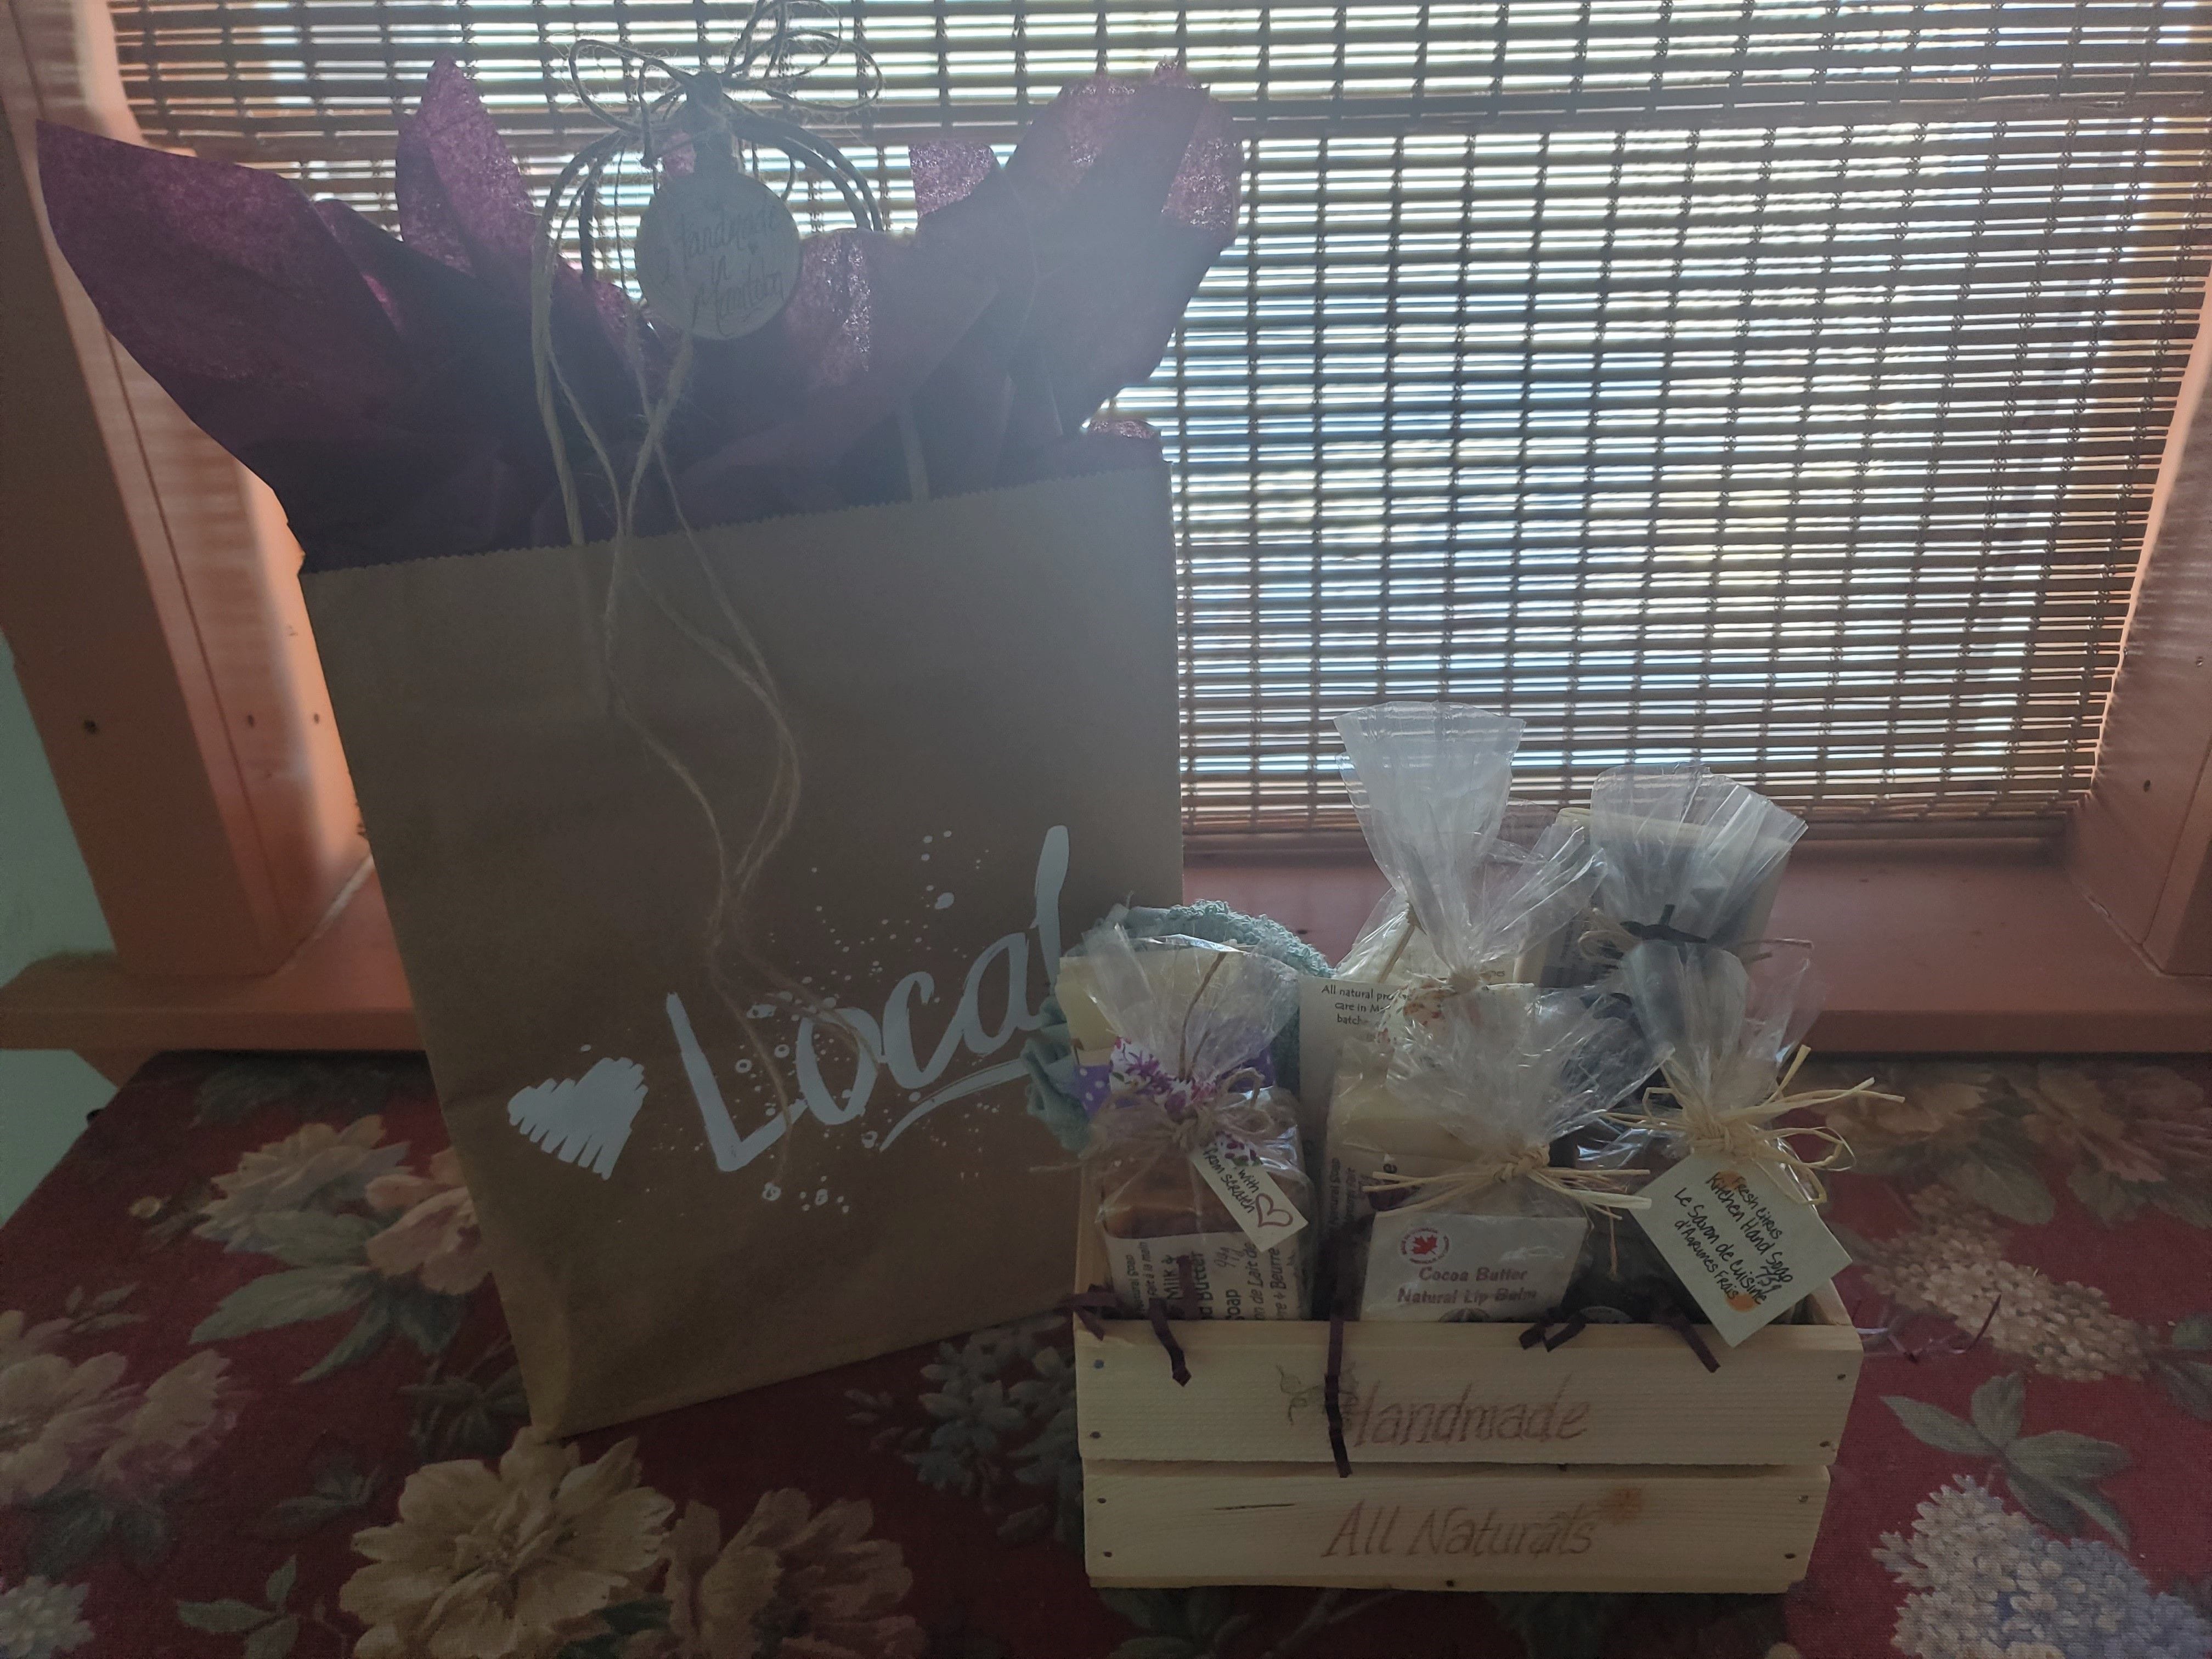 Beautiful, unique gift collections Manitoba-made in handmade wooden crates and presented in a decorated gift bag, all dressed up and ready to gift!